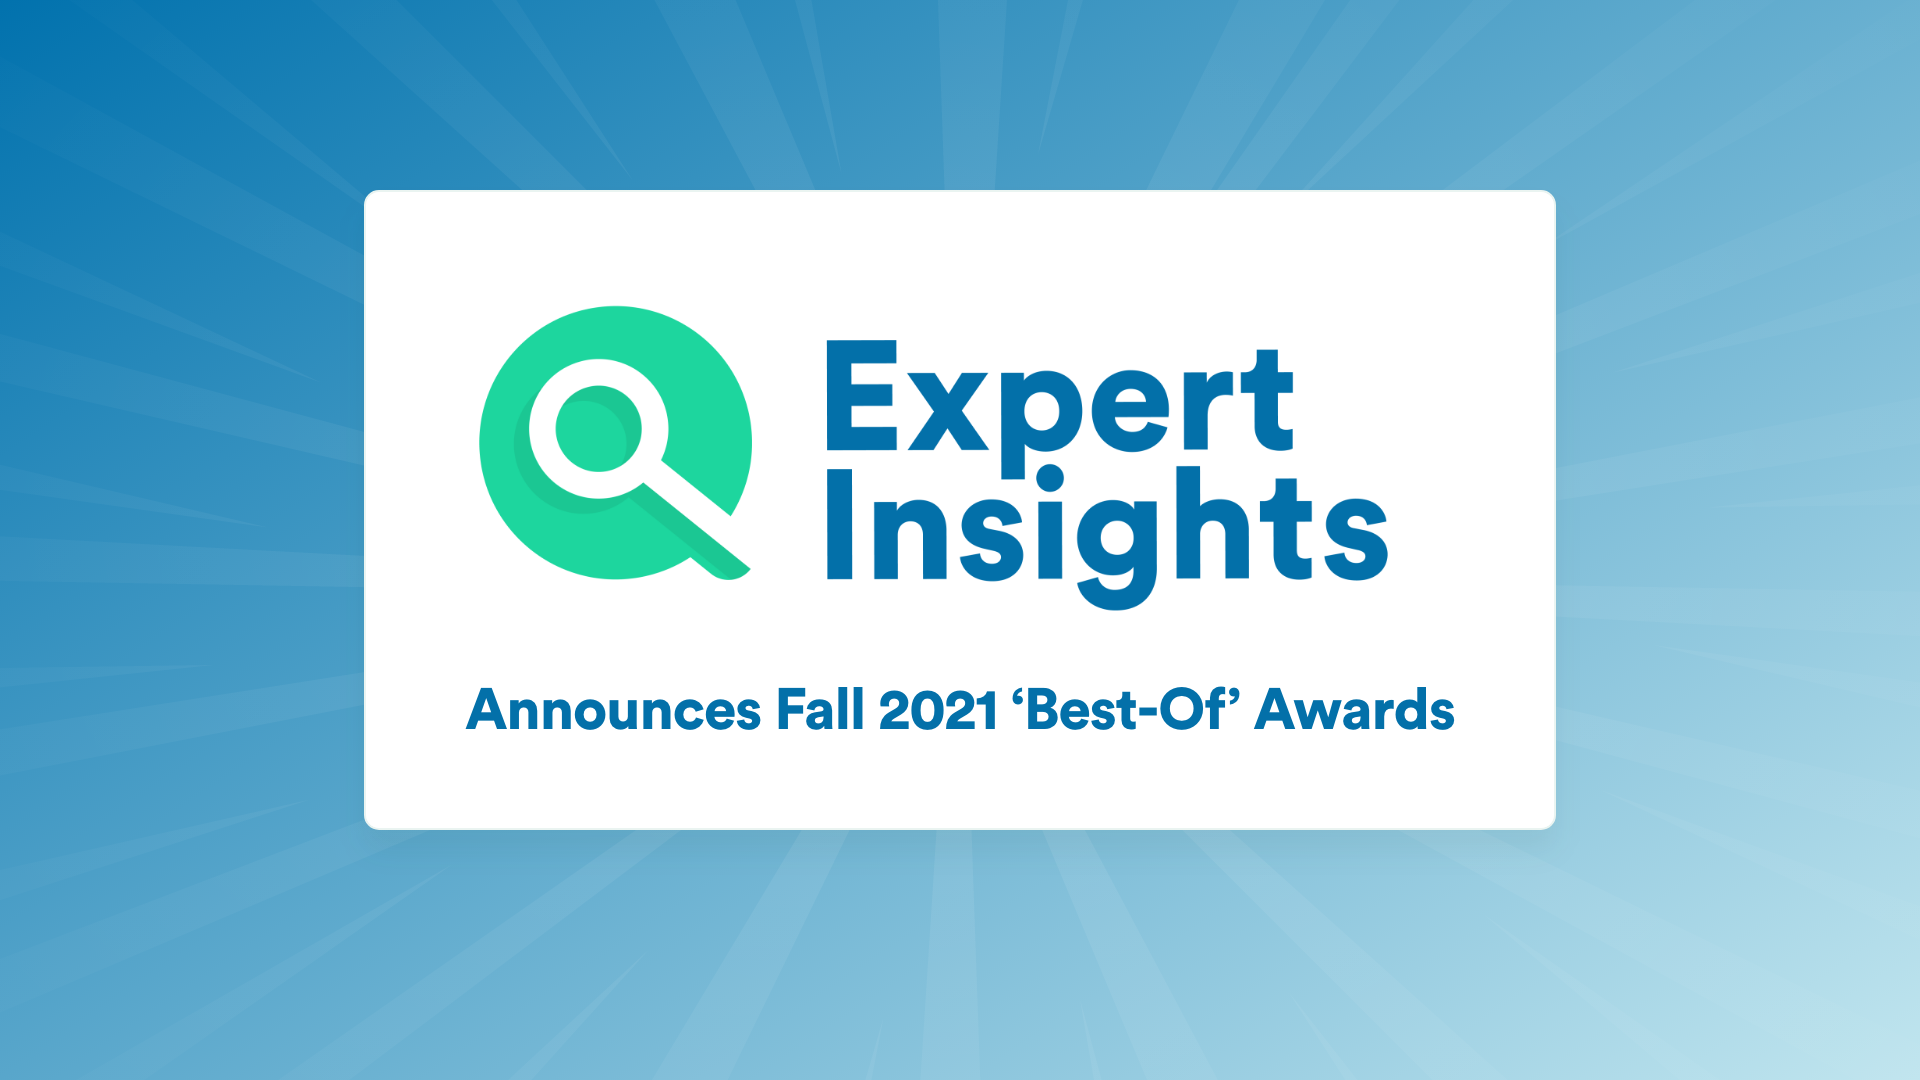 Expert Insights To Announce Fall 2021 “Best-Of” Award Winners For Industry-Leading Cybersecurity Solutions